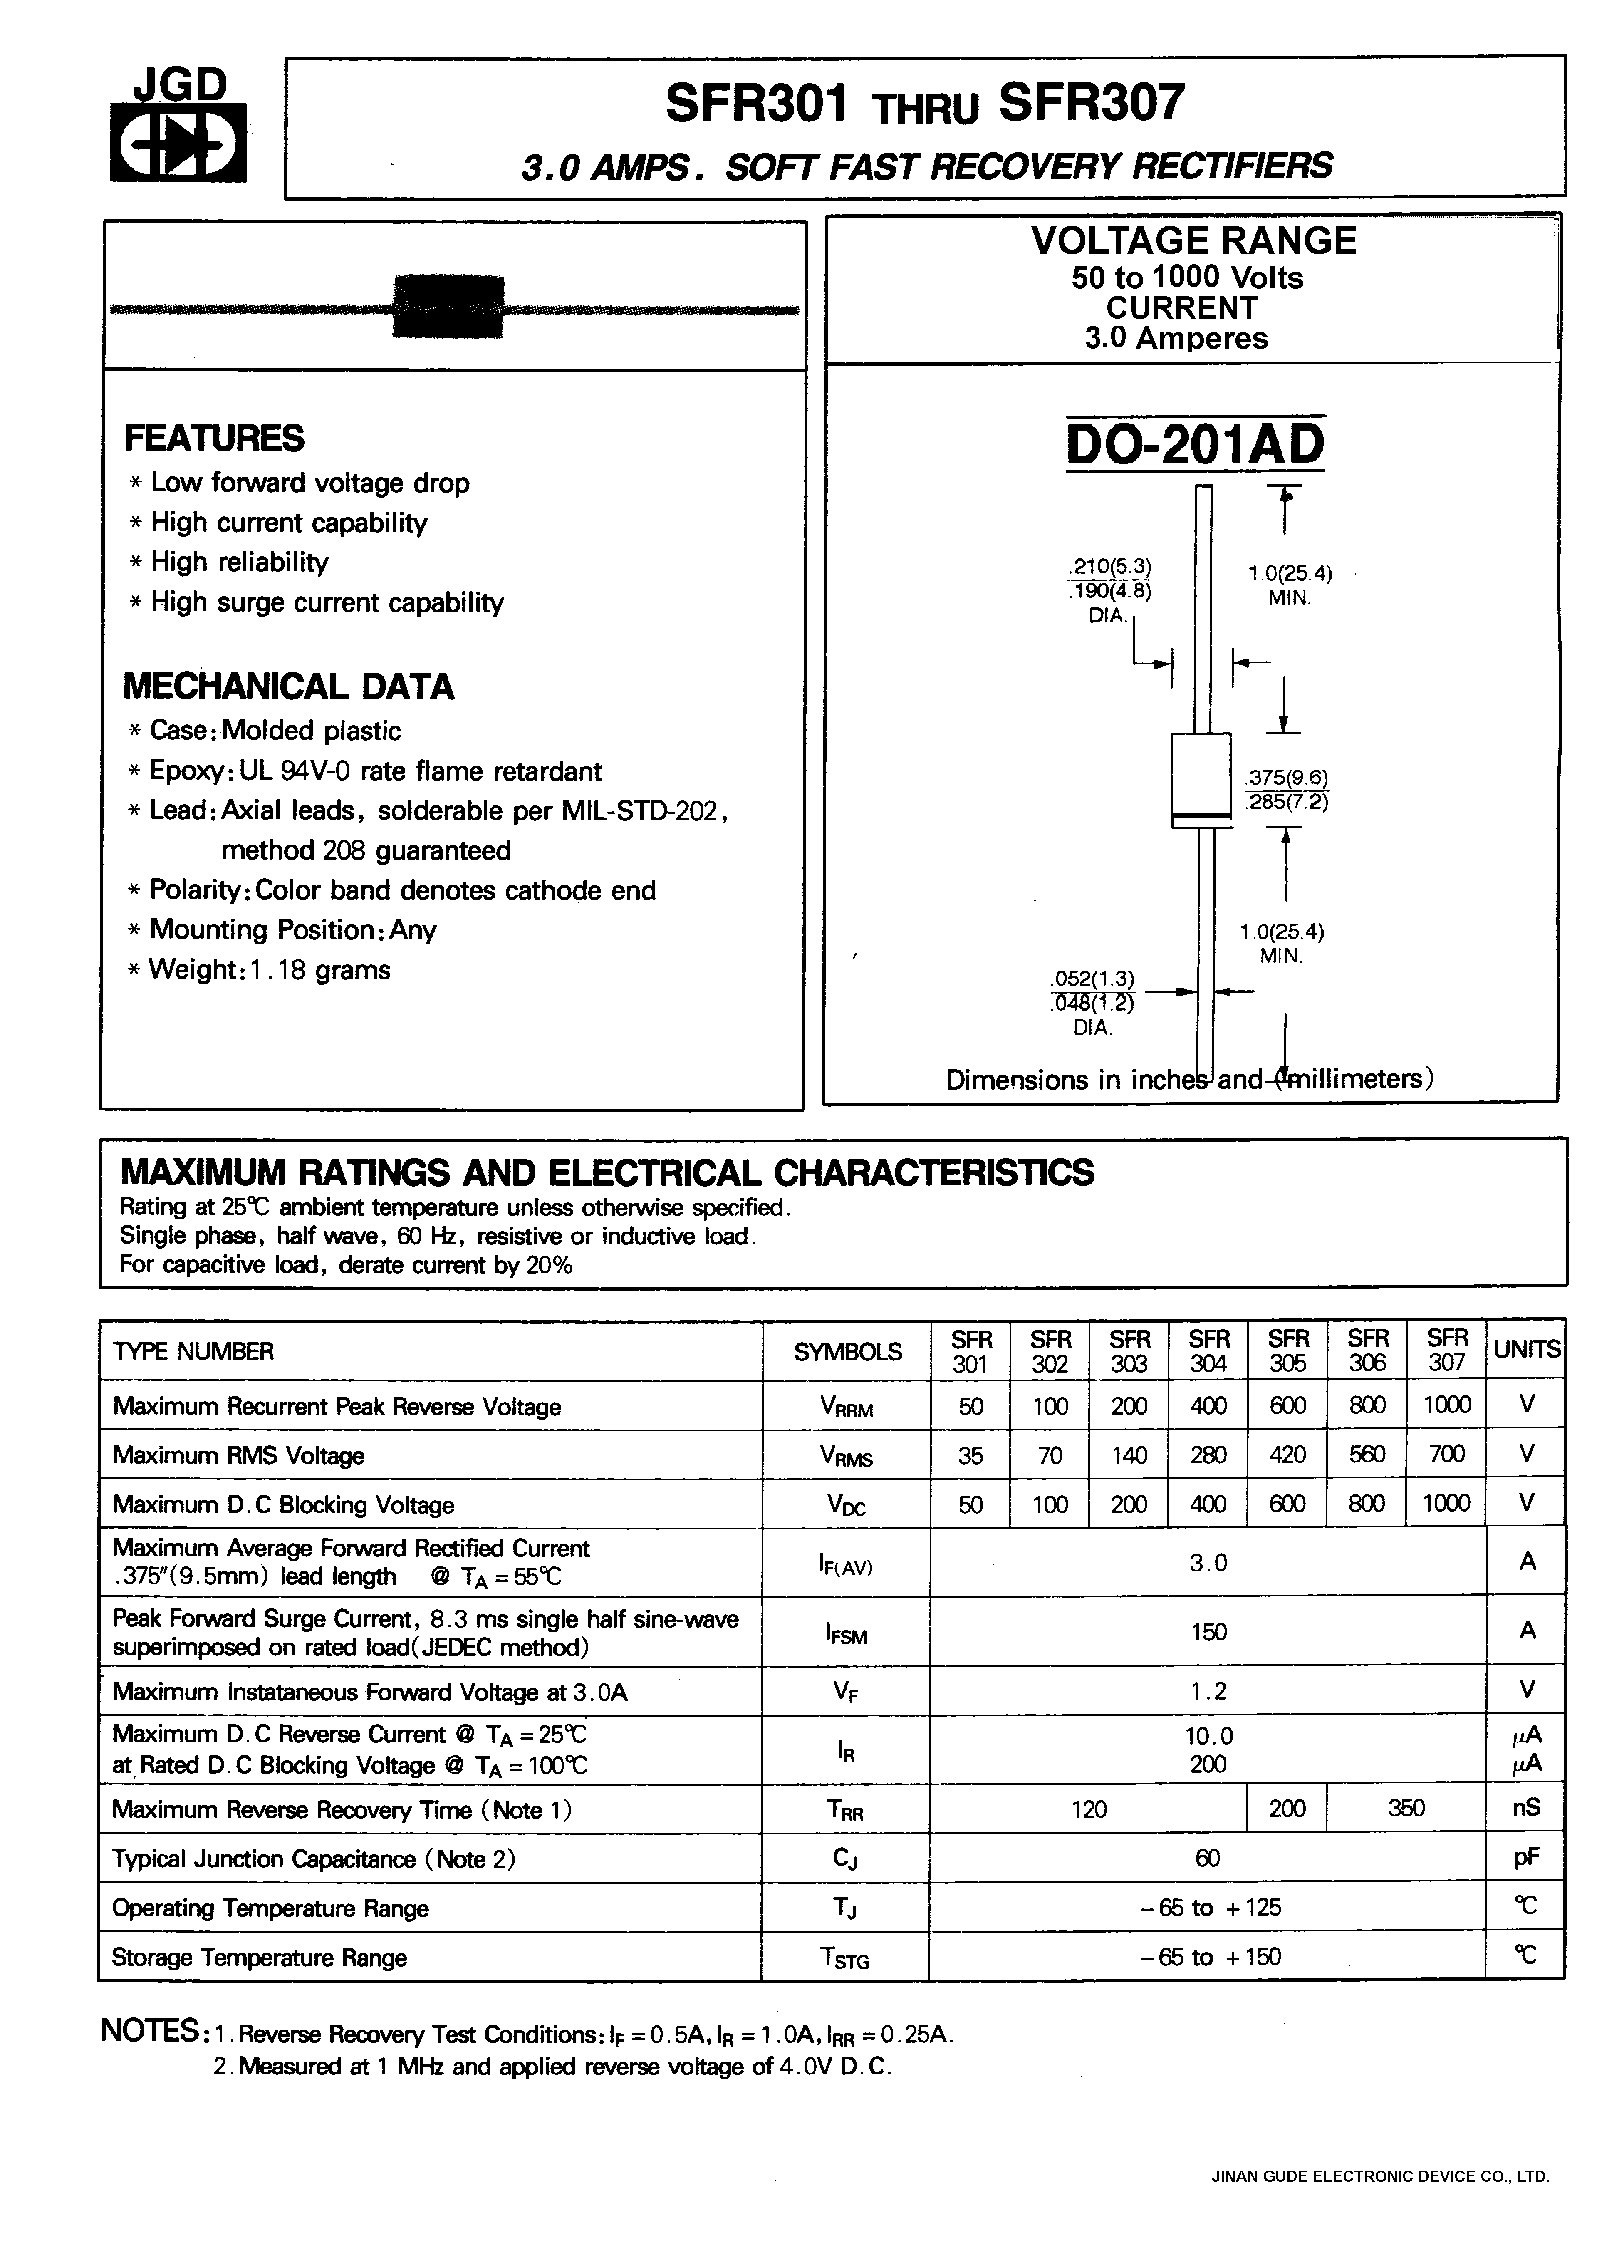 Datasheet SFR301 - 3.0 AMPS. SOFT FAST RECOVERY RECTIFIERS page 1